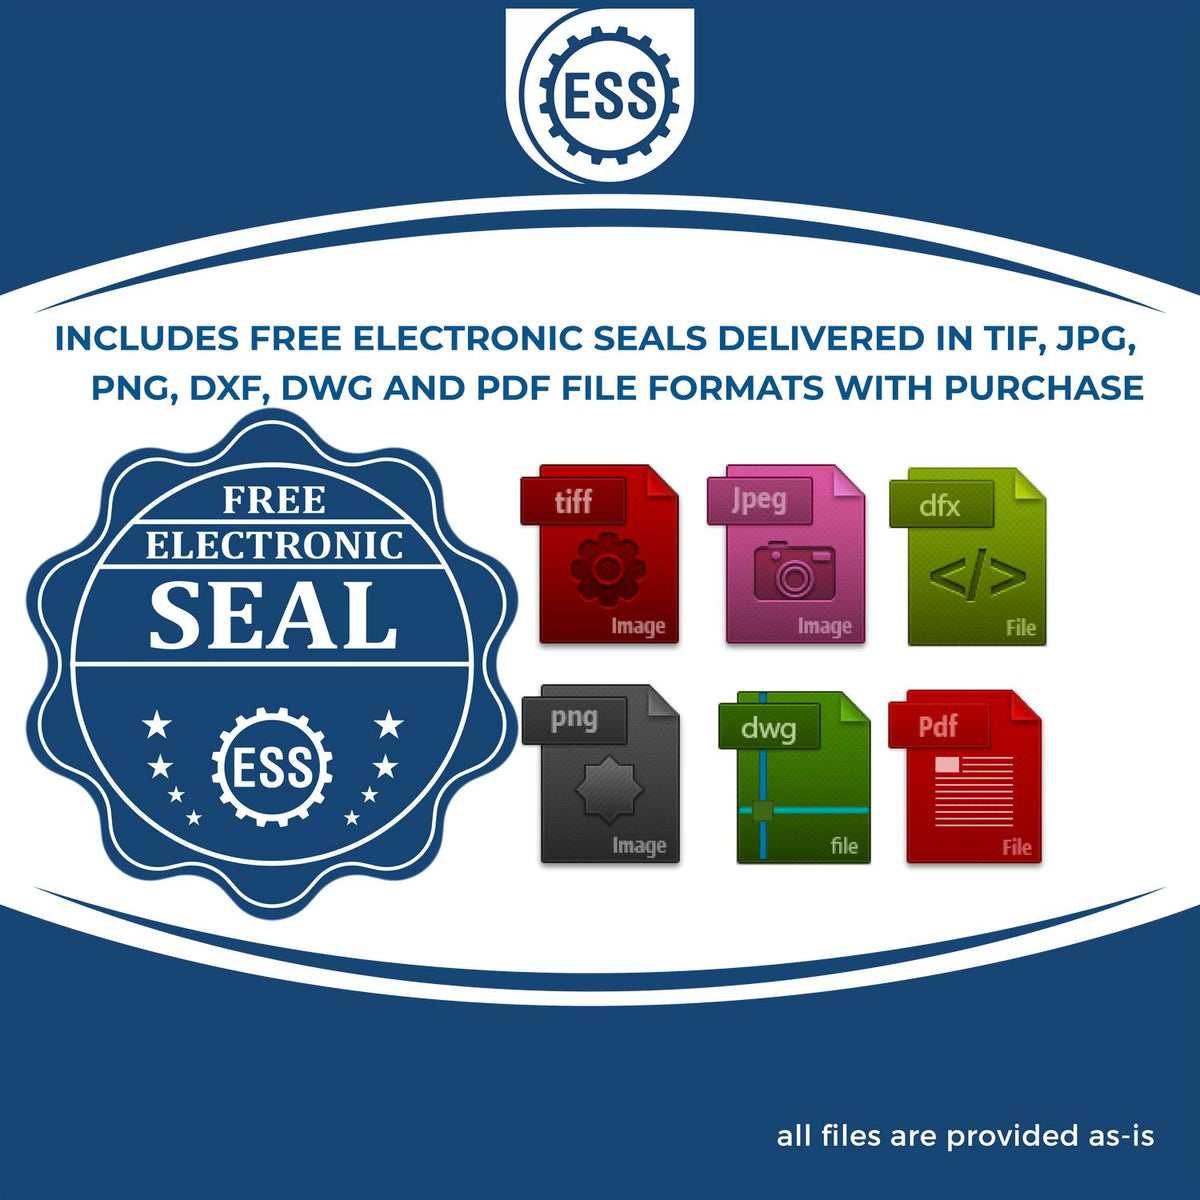 An infographic for the free electronic seal for the Hybrid Colorado Land Surveyor Seal illustrating the different file type icons such as DXF, DWG, TIF, JPG and PNG.